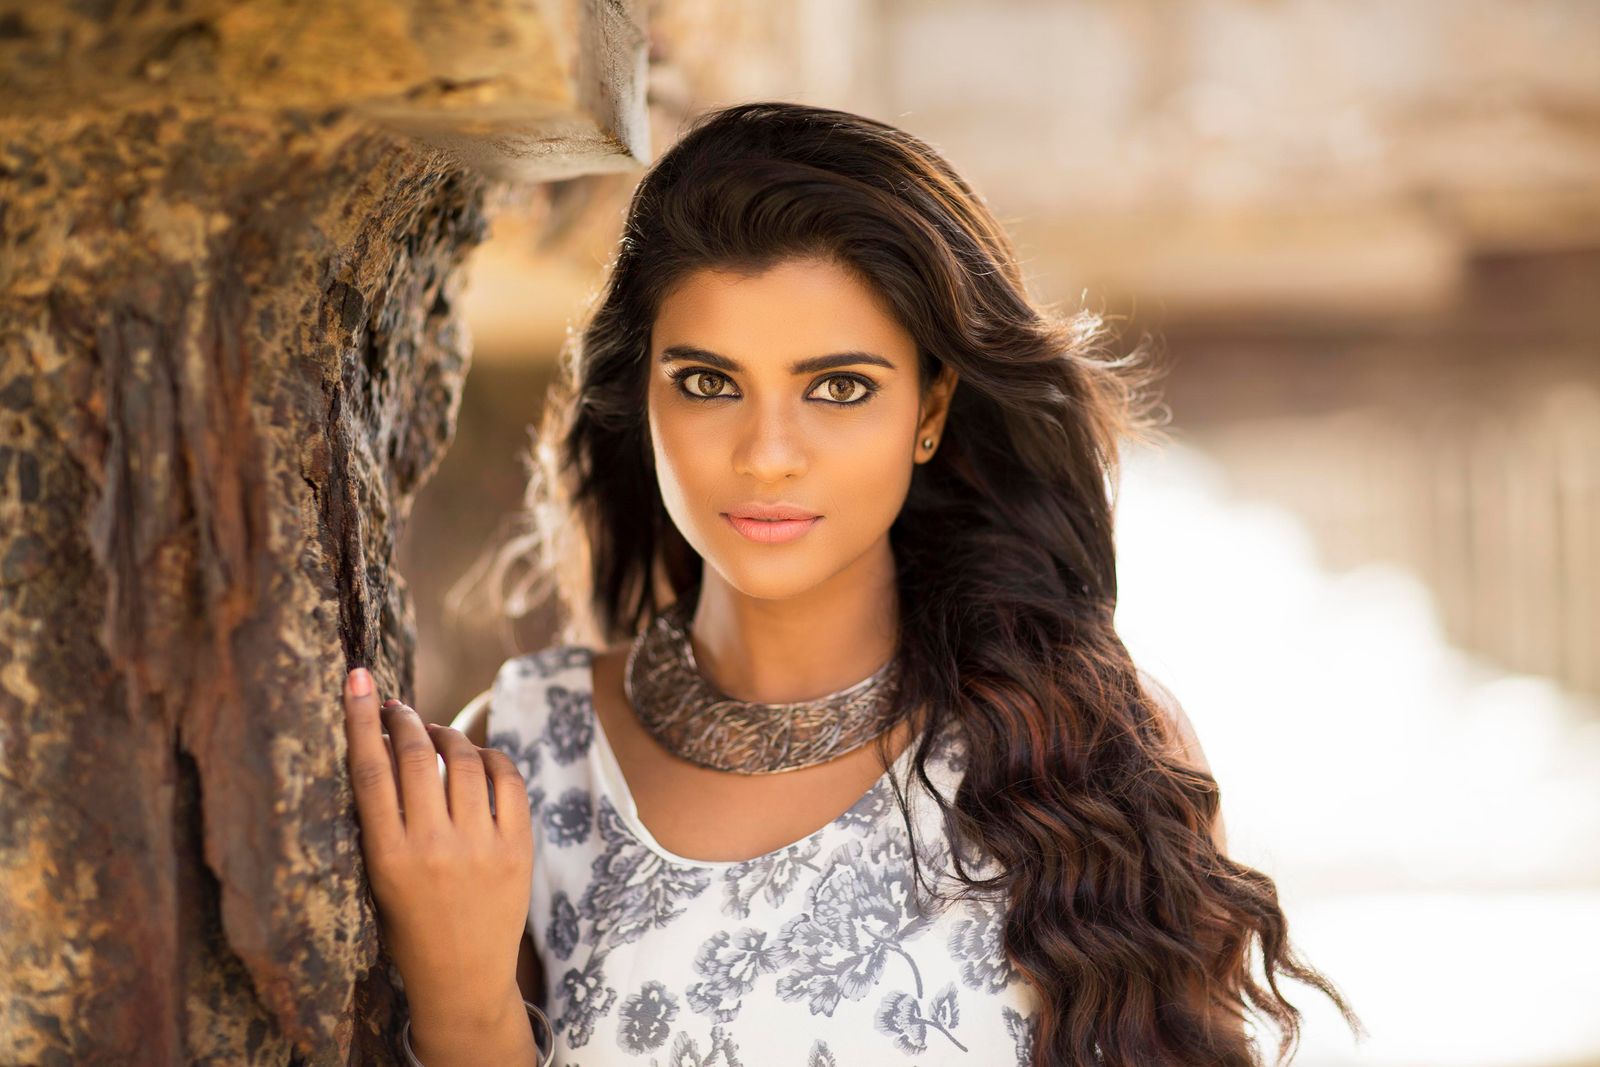 Kollywood Diva Aishwarya Rajesh To Play The Lead Role In This Web Series!